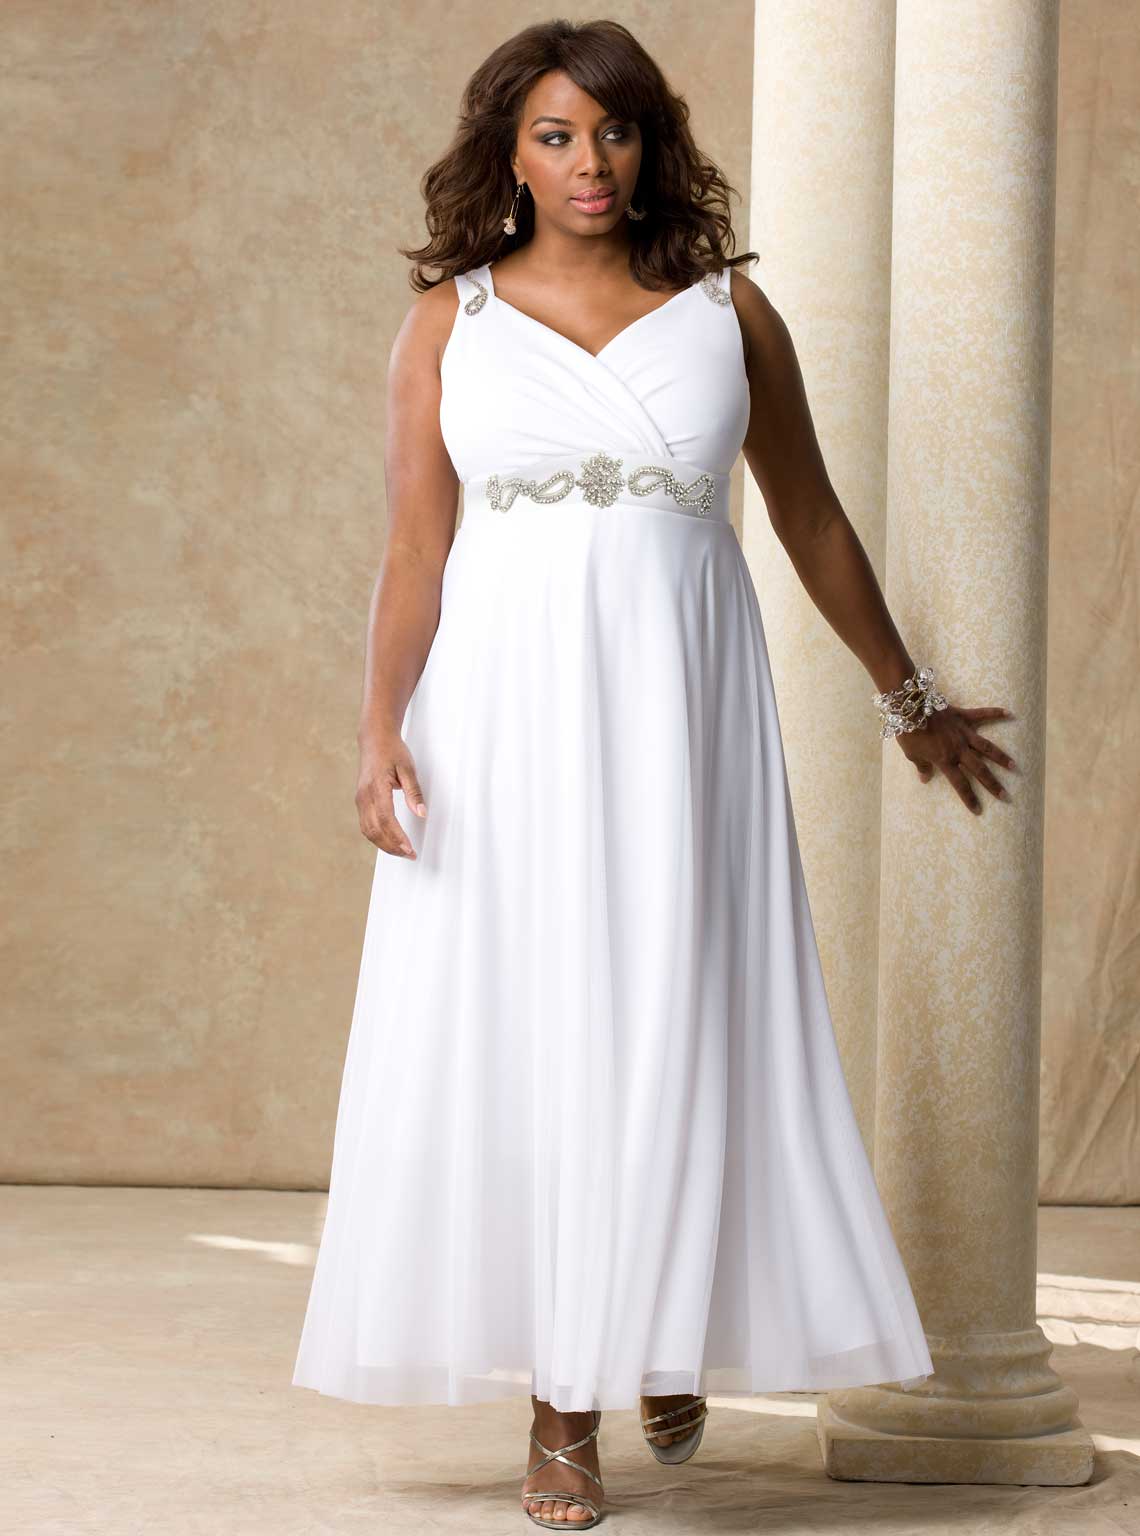 strapless wedding dresses ball gown lace dresses for full figured plus size women,here is this wedding dress 